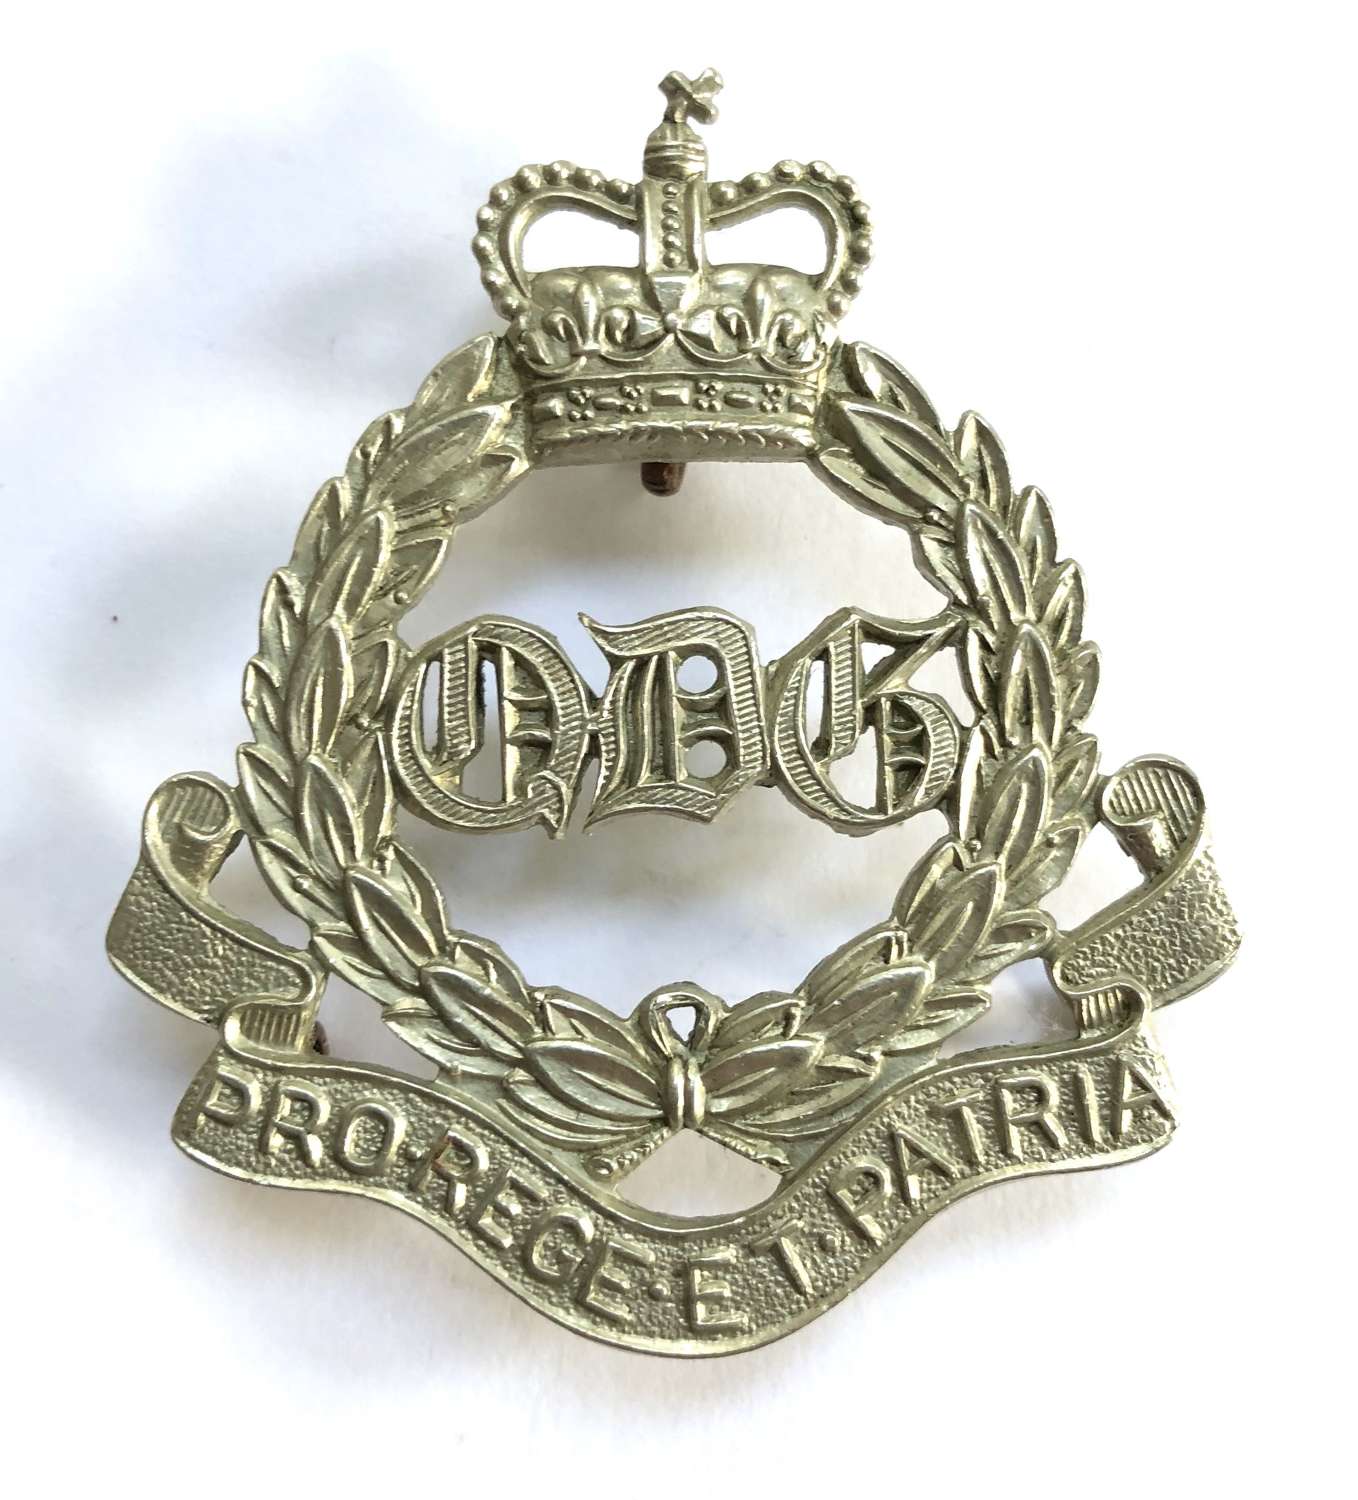 1st Queen's Dragoon Guards NCO's arm badge